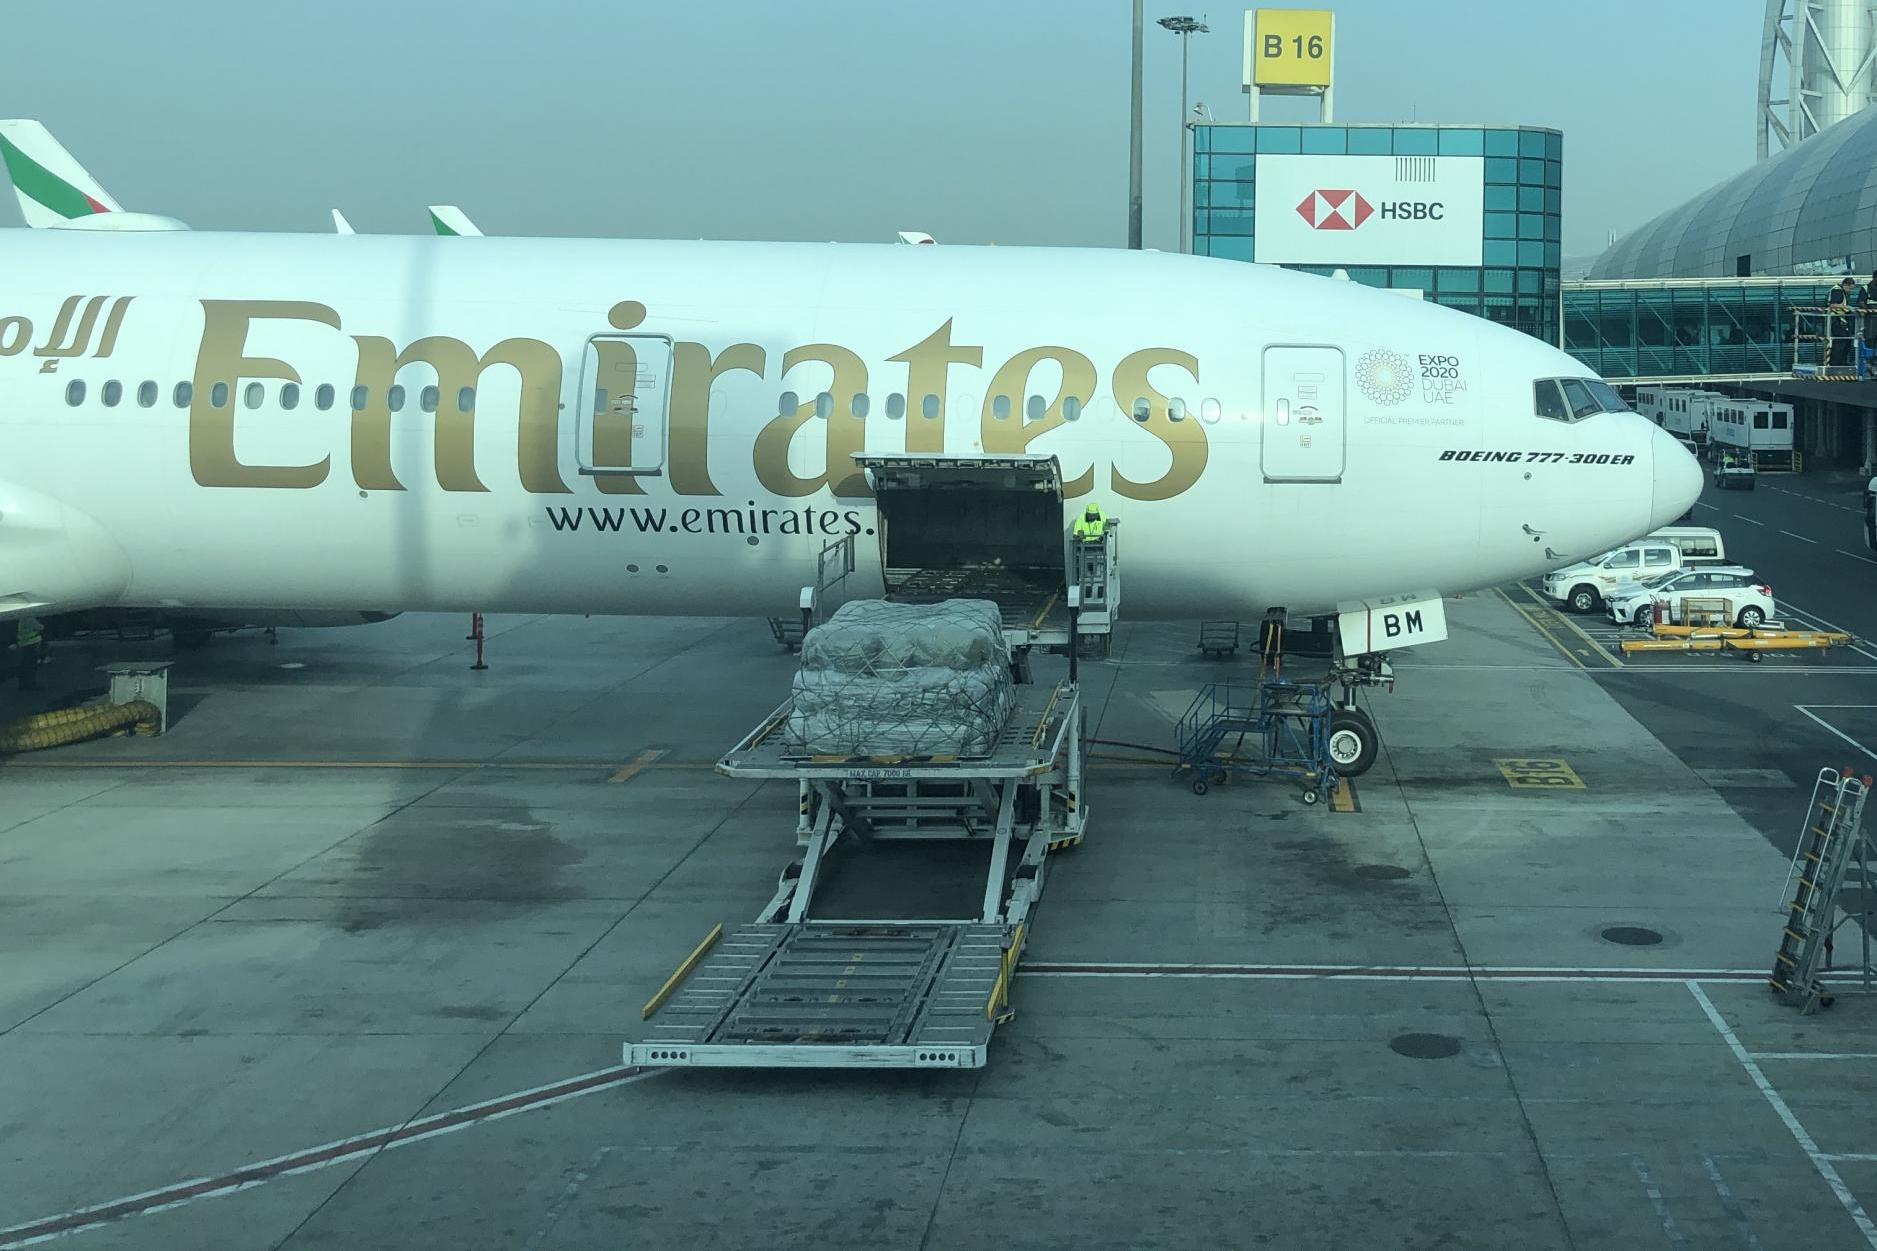 Emirates airlines has said it will be cutting staff because of the Covid-19 pandemic